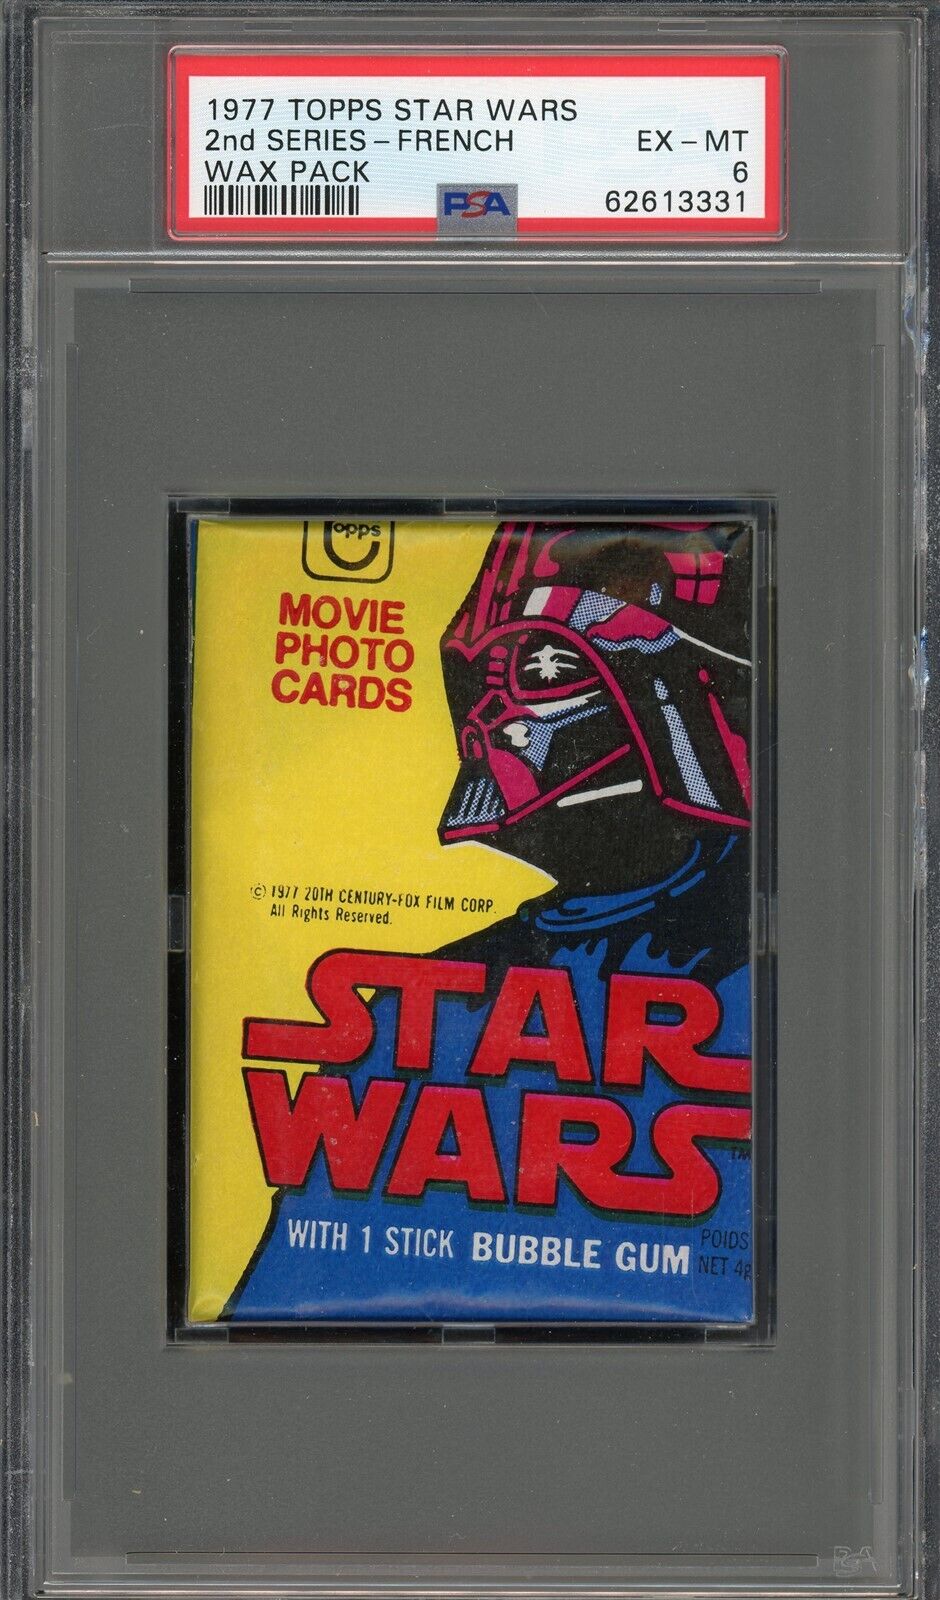 1977 Topps Star Wars Pack 2nd Series French Wrapper TOUGH PSA 6 